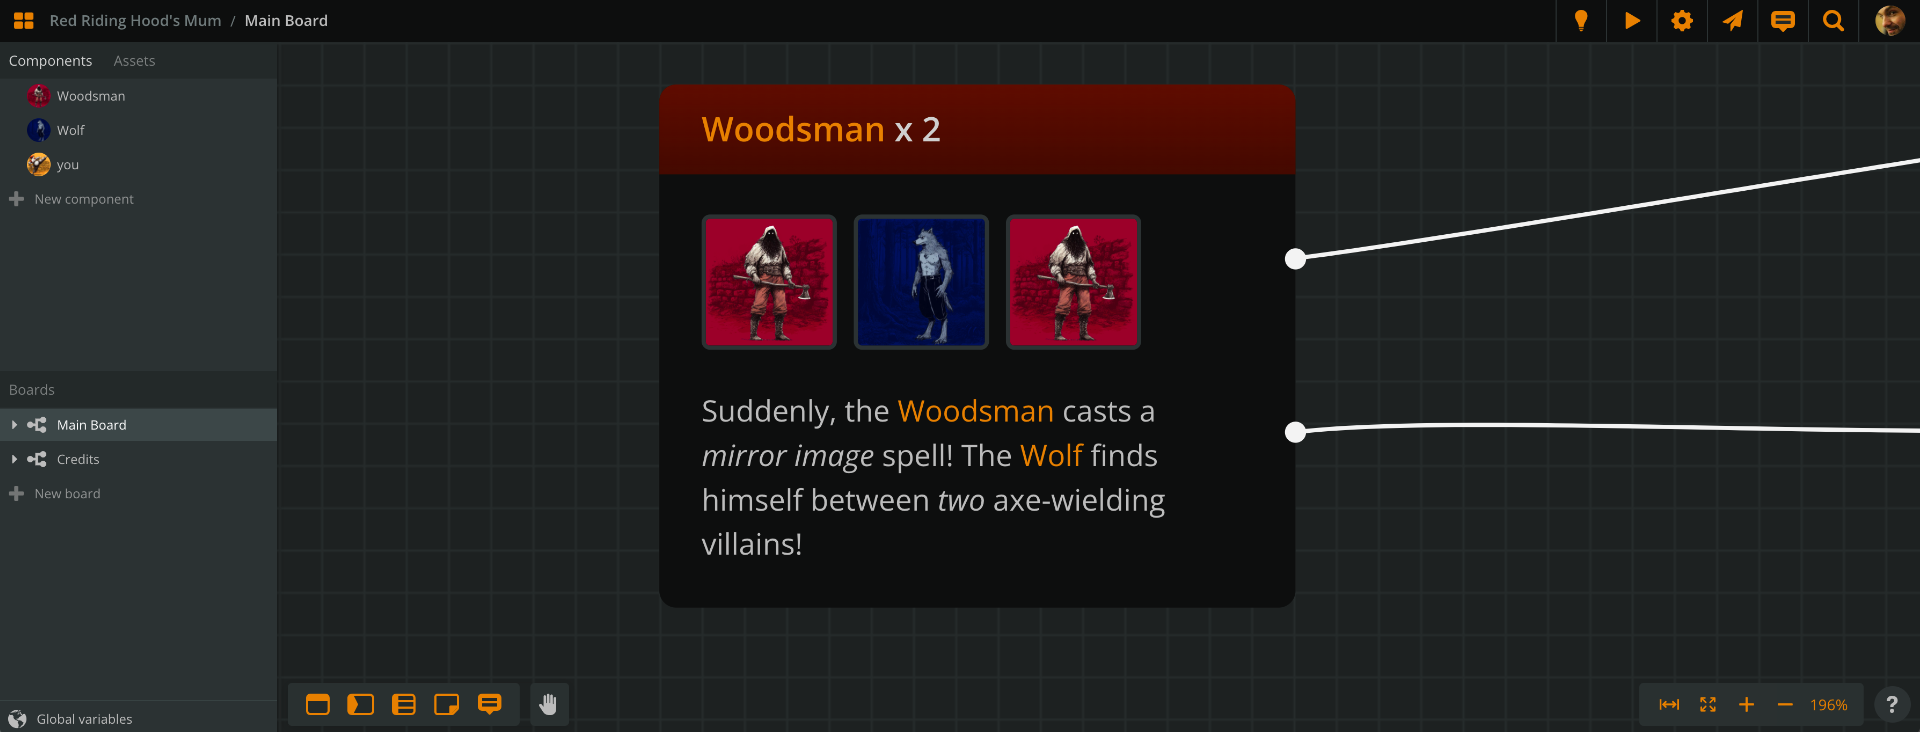 Element with multiple components attached: two Woodsman and one Wolf component in the middle.